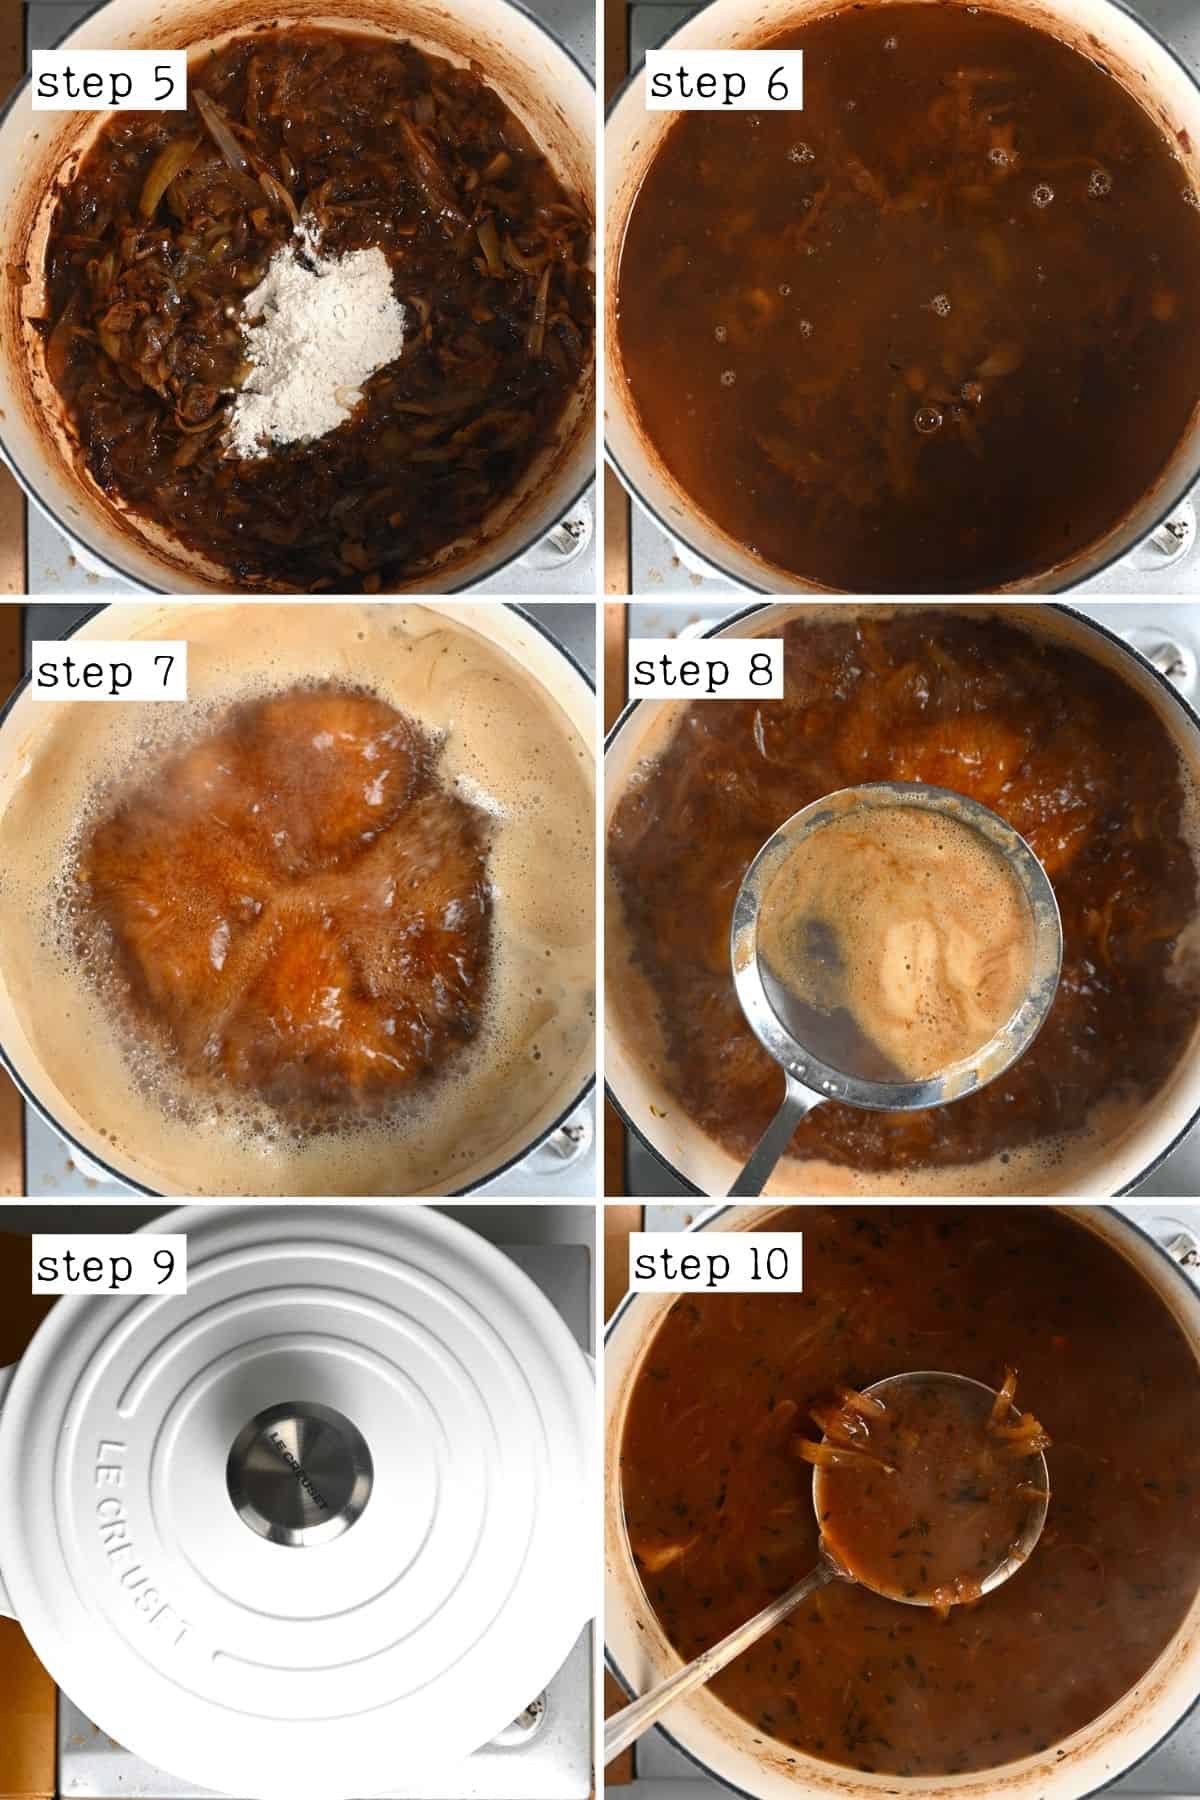 Steps for making French onion soup